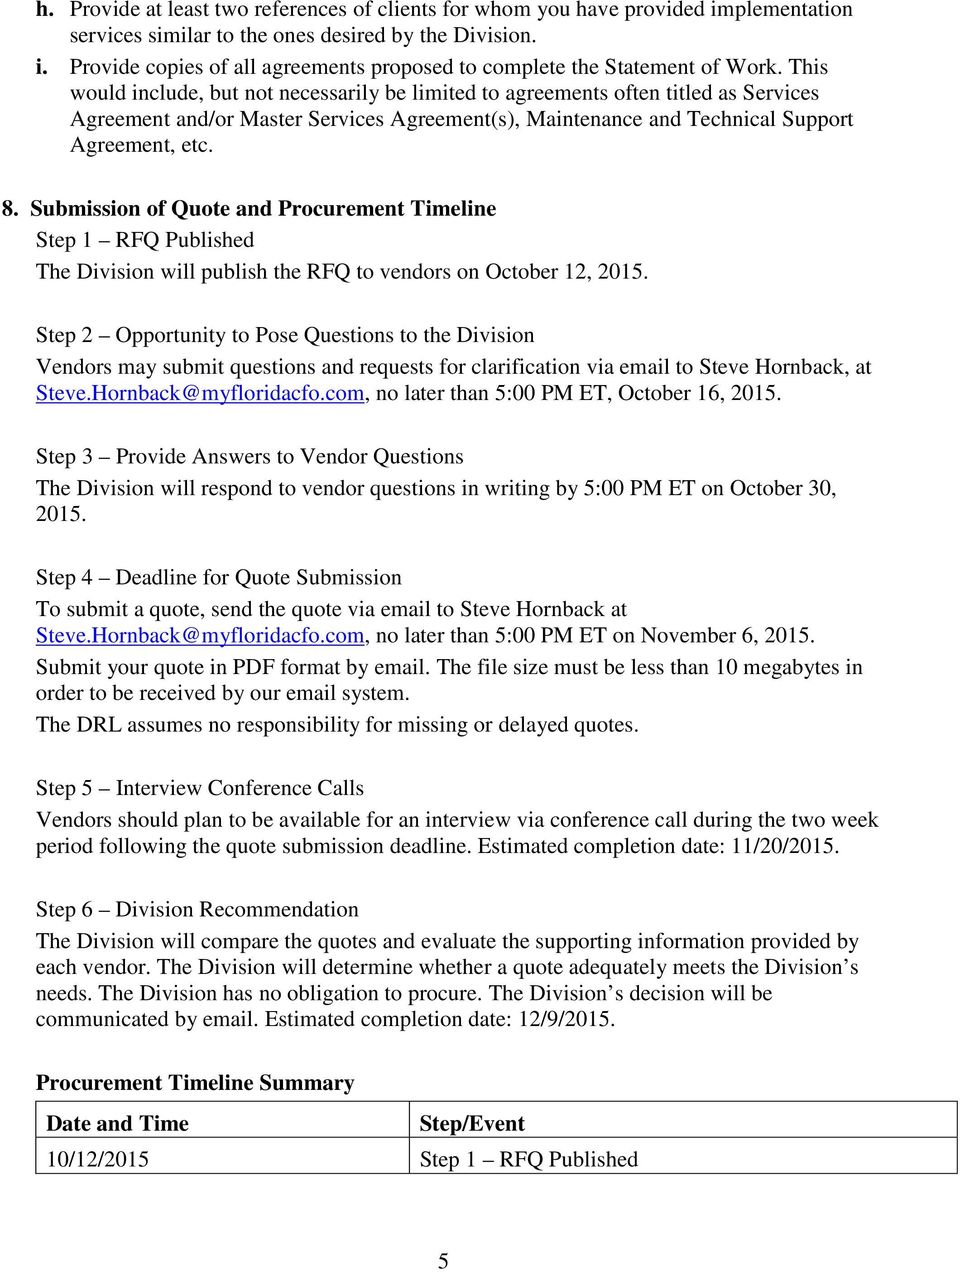 Submission of Quote and Procurement Timeline Step 1 RFQ Published The Division will publish the RFQ to vendors on October 12, 2015.